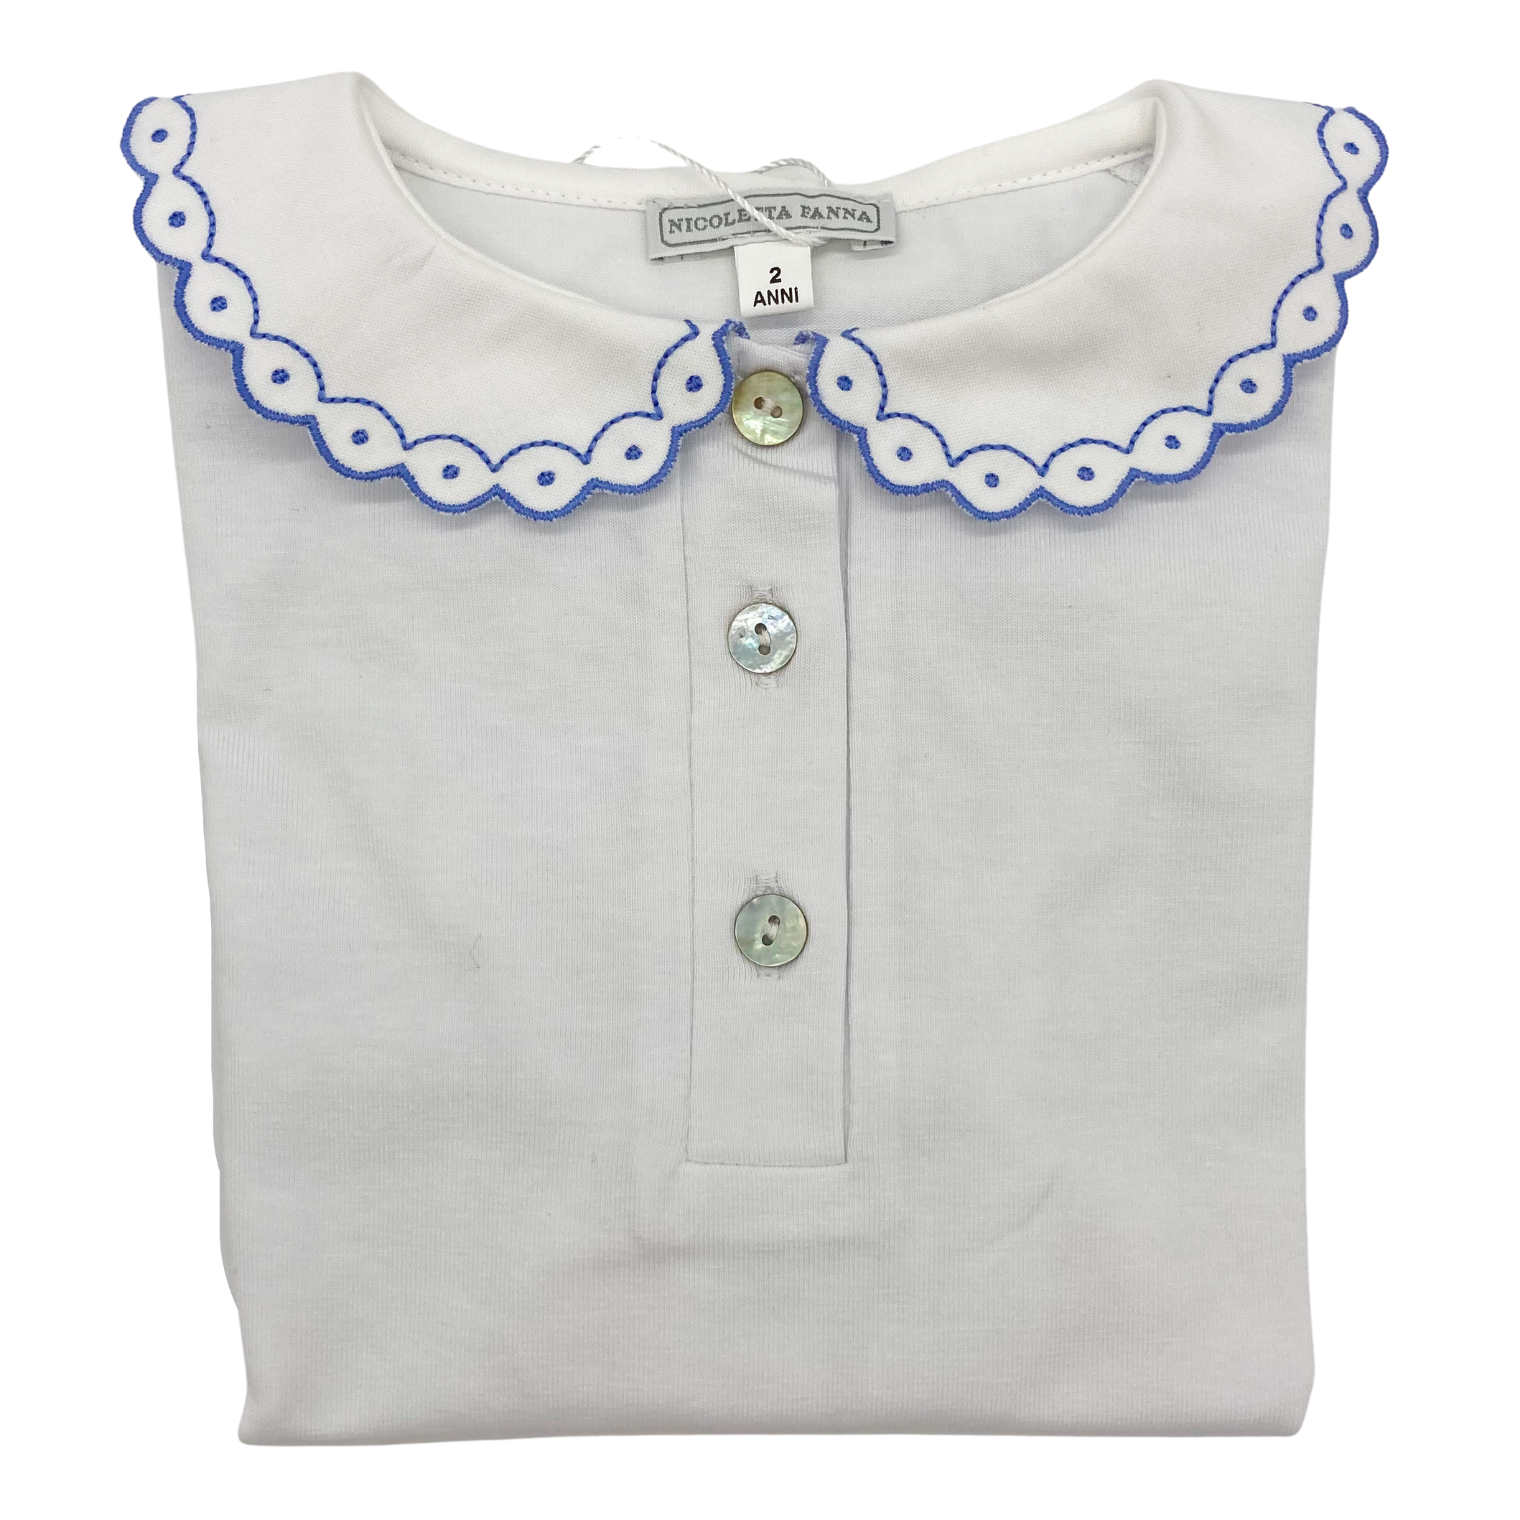 White Cotton Shirt with Embroidered Collar - Emily - Nicoletta Fanna